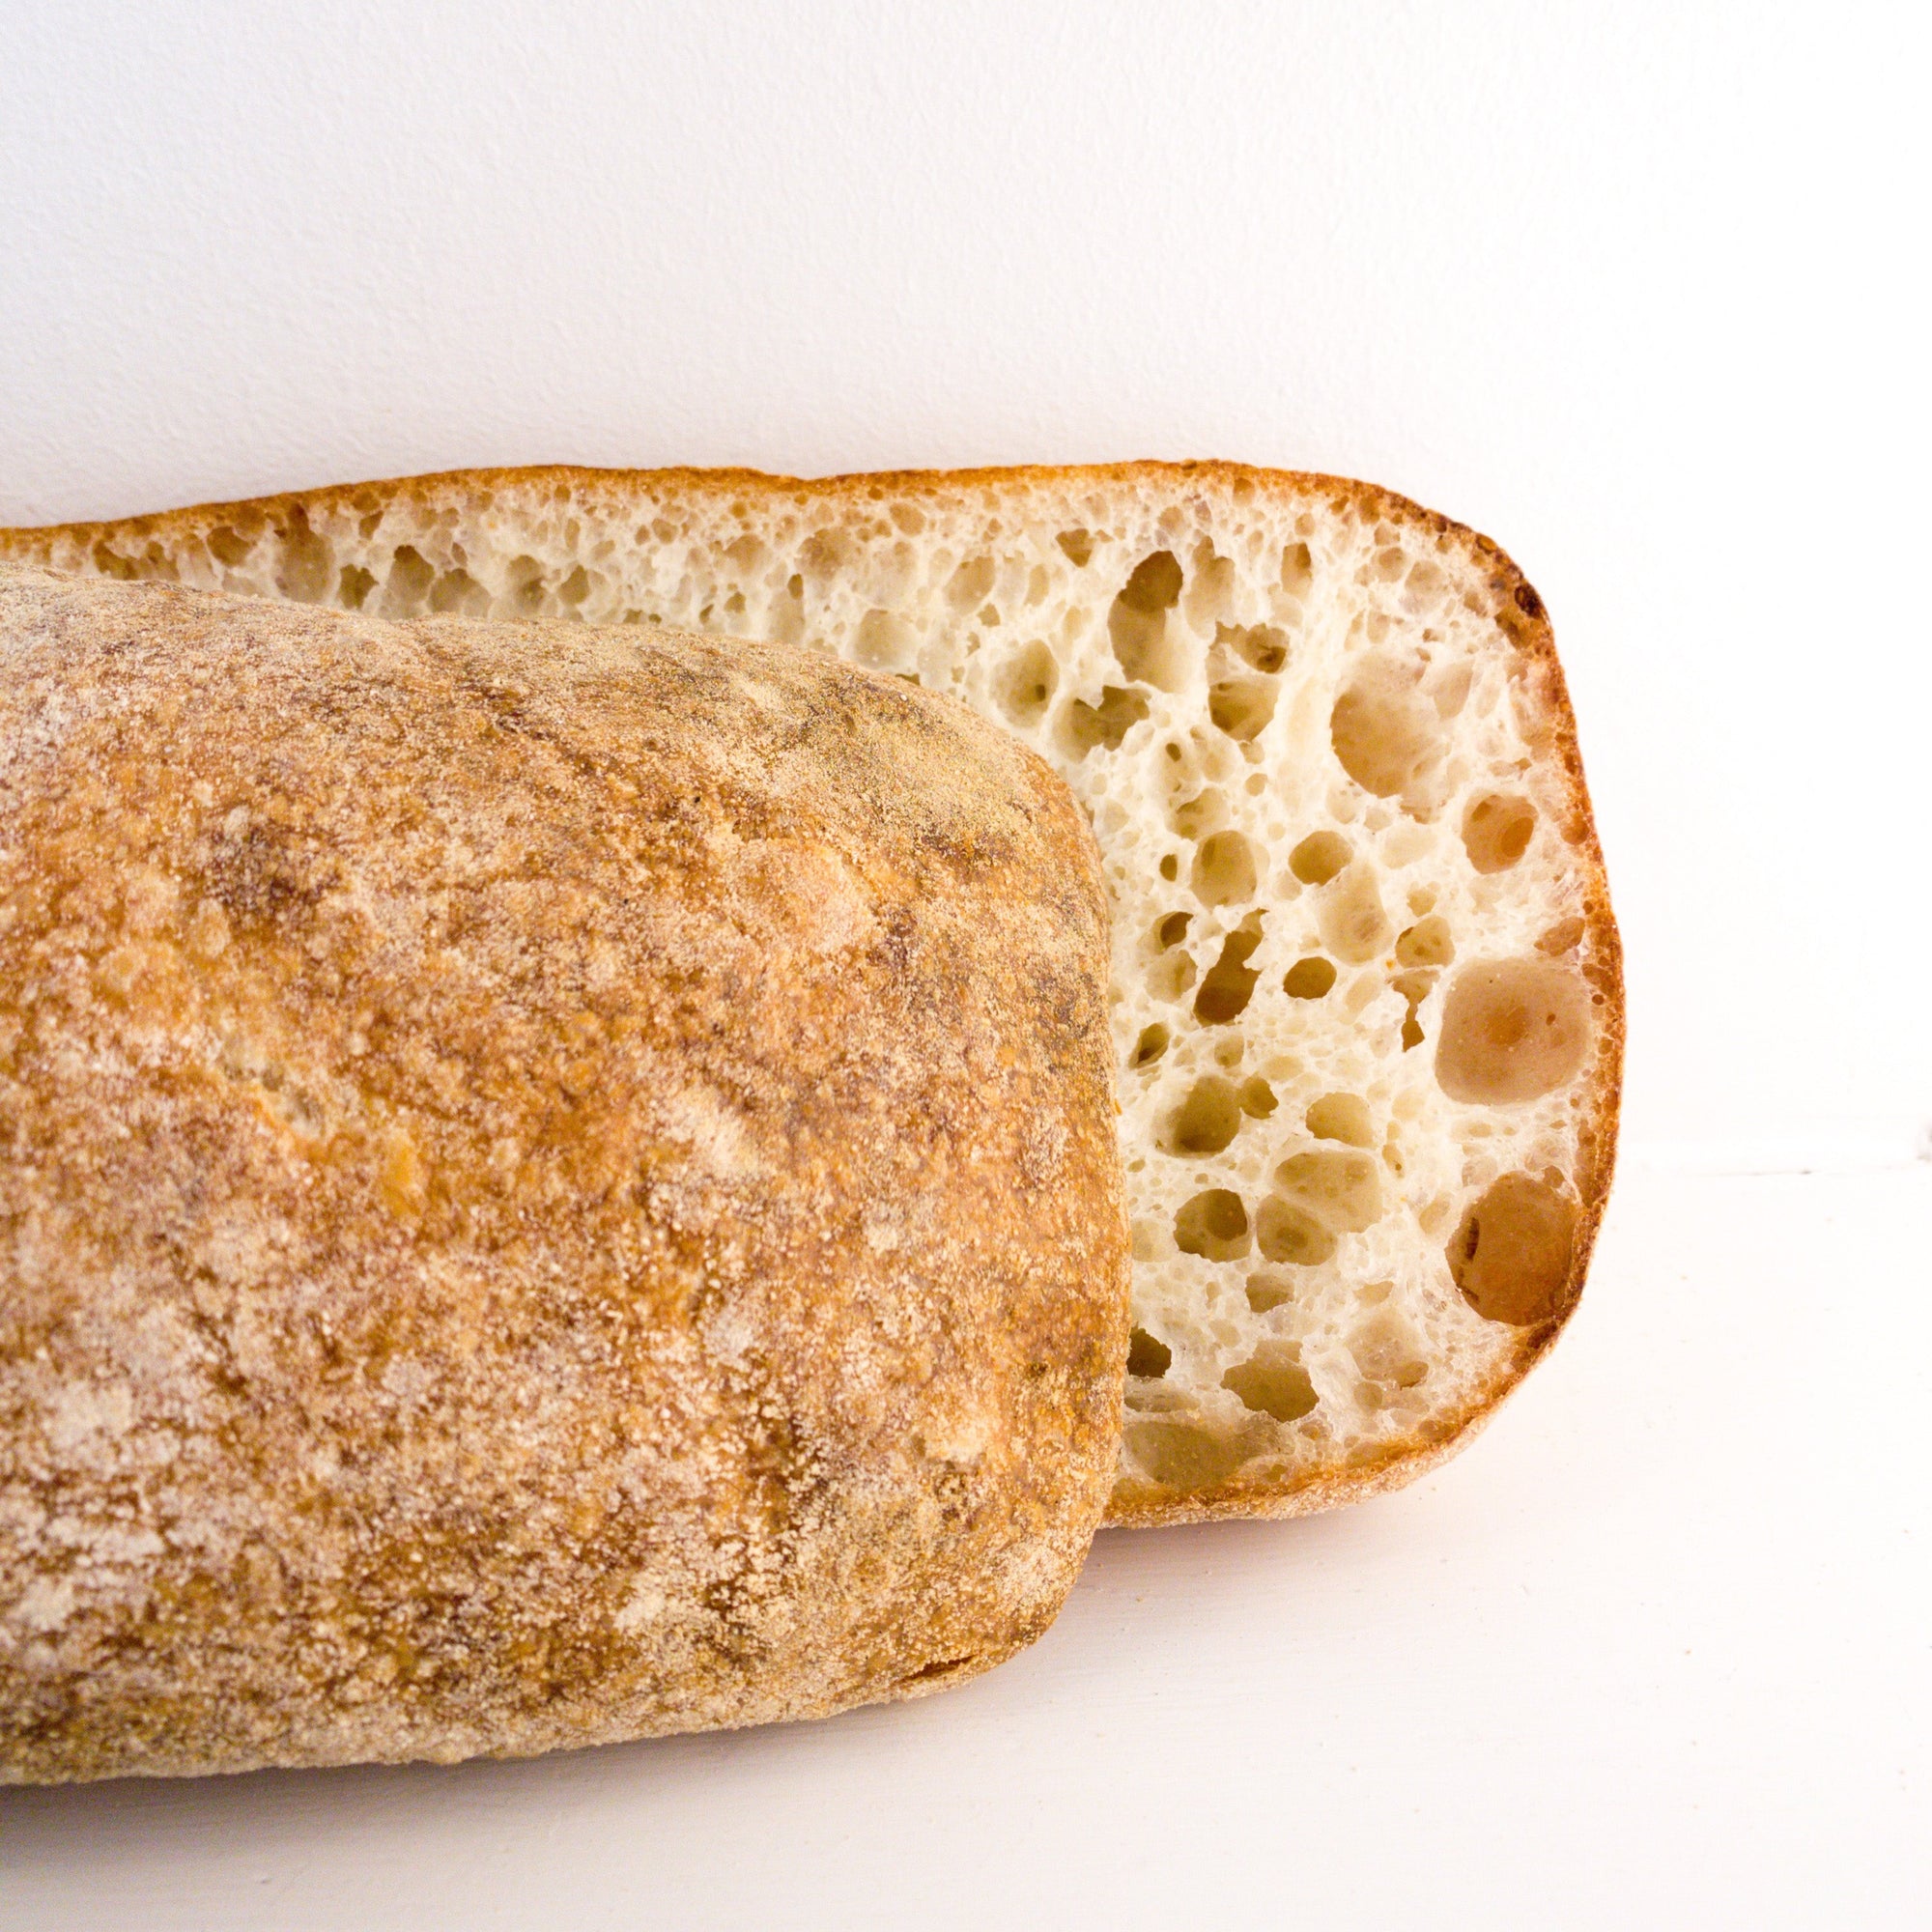 image of the end of a sliced ciabatta loaf